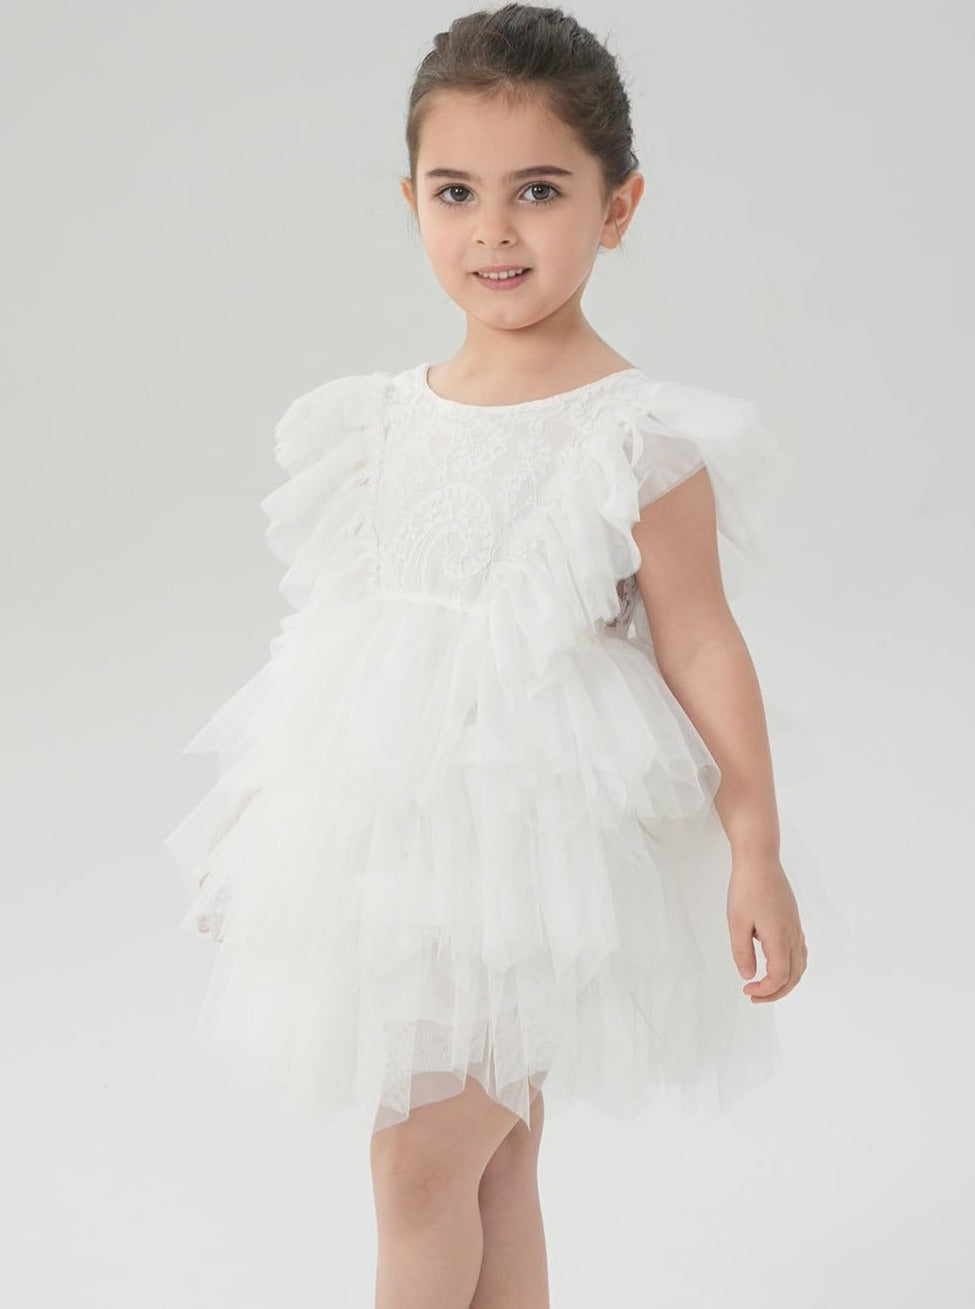 Paisley Lace Flower Girl Dress in White